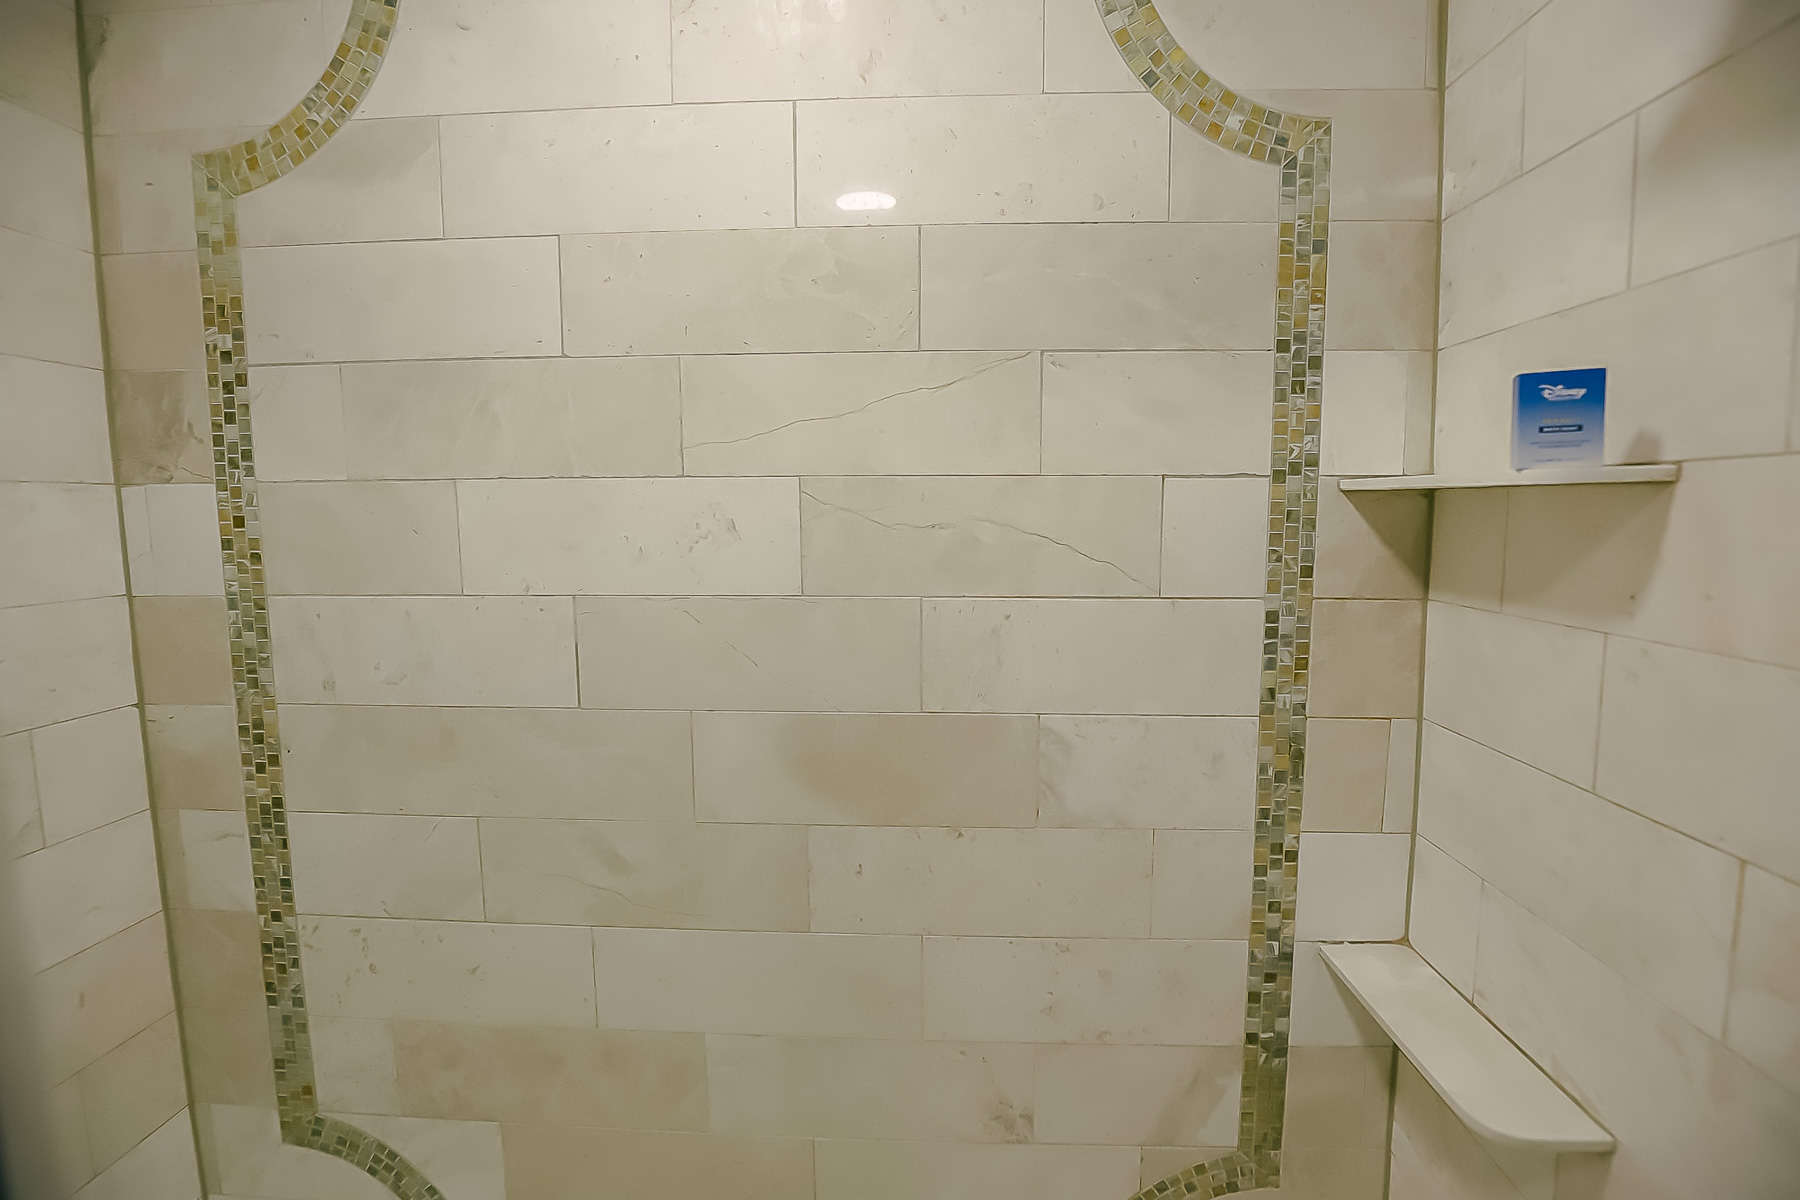 ledges in the shower to place personal items 